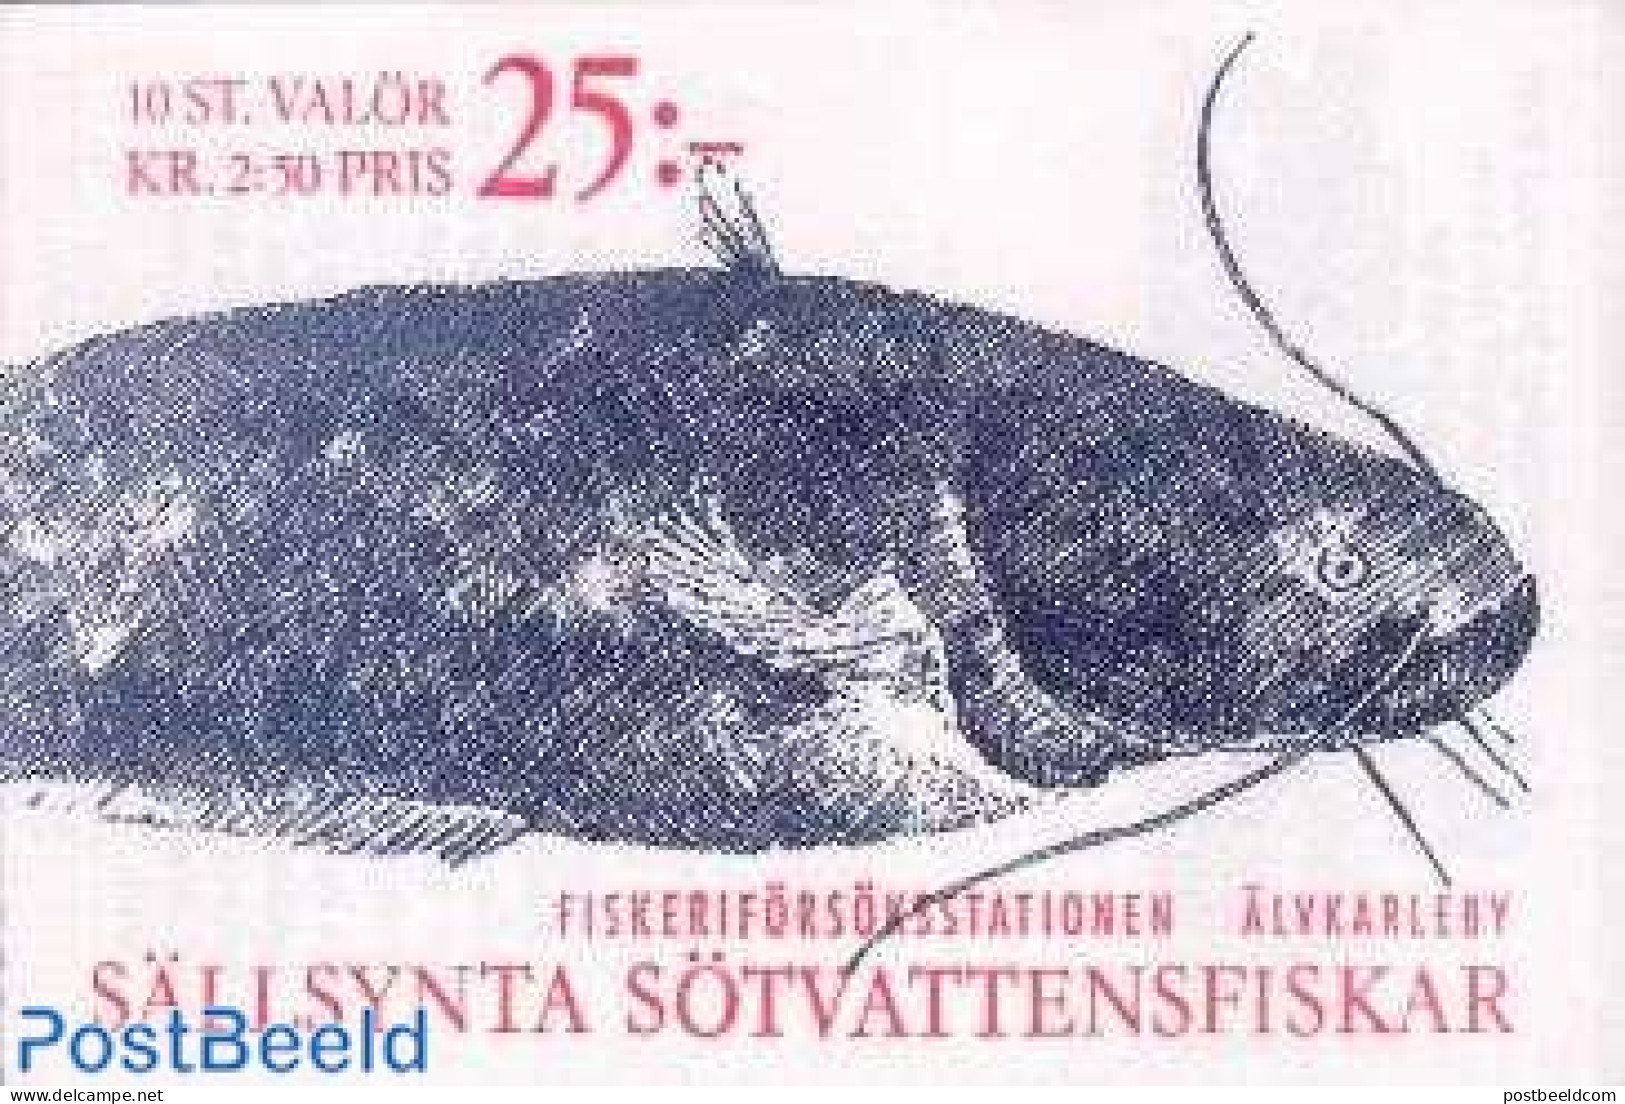 Sweden 1991 Fish Booklet, Mint NH, Nature - Fish - World Wildlife Fund (WWF) - Stamp Booklets - Neufs